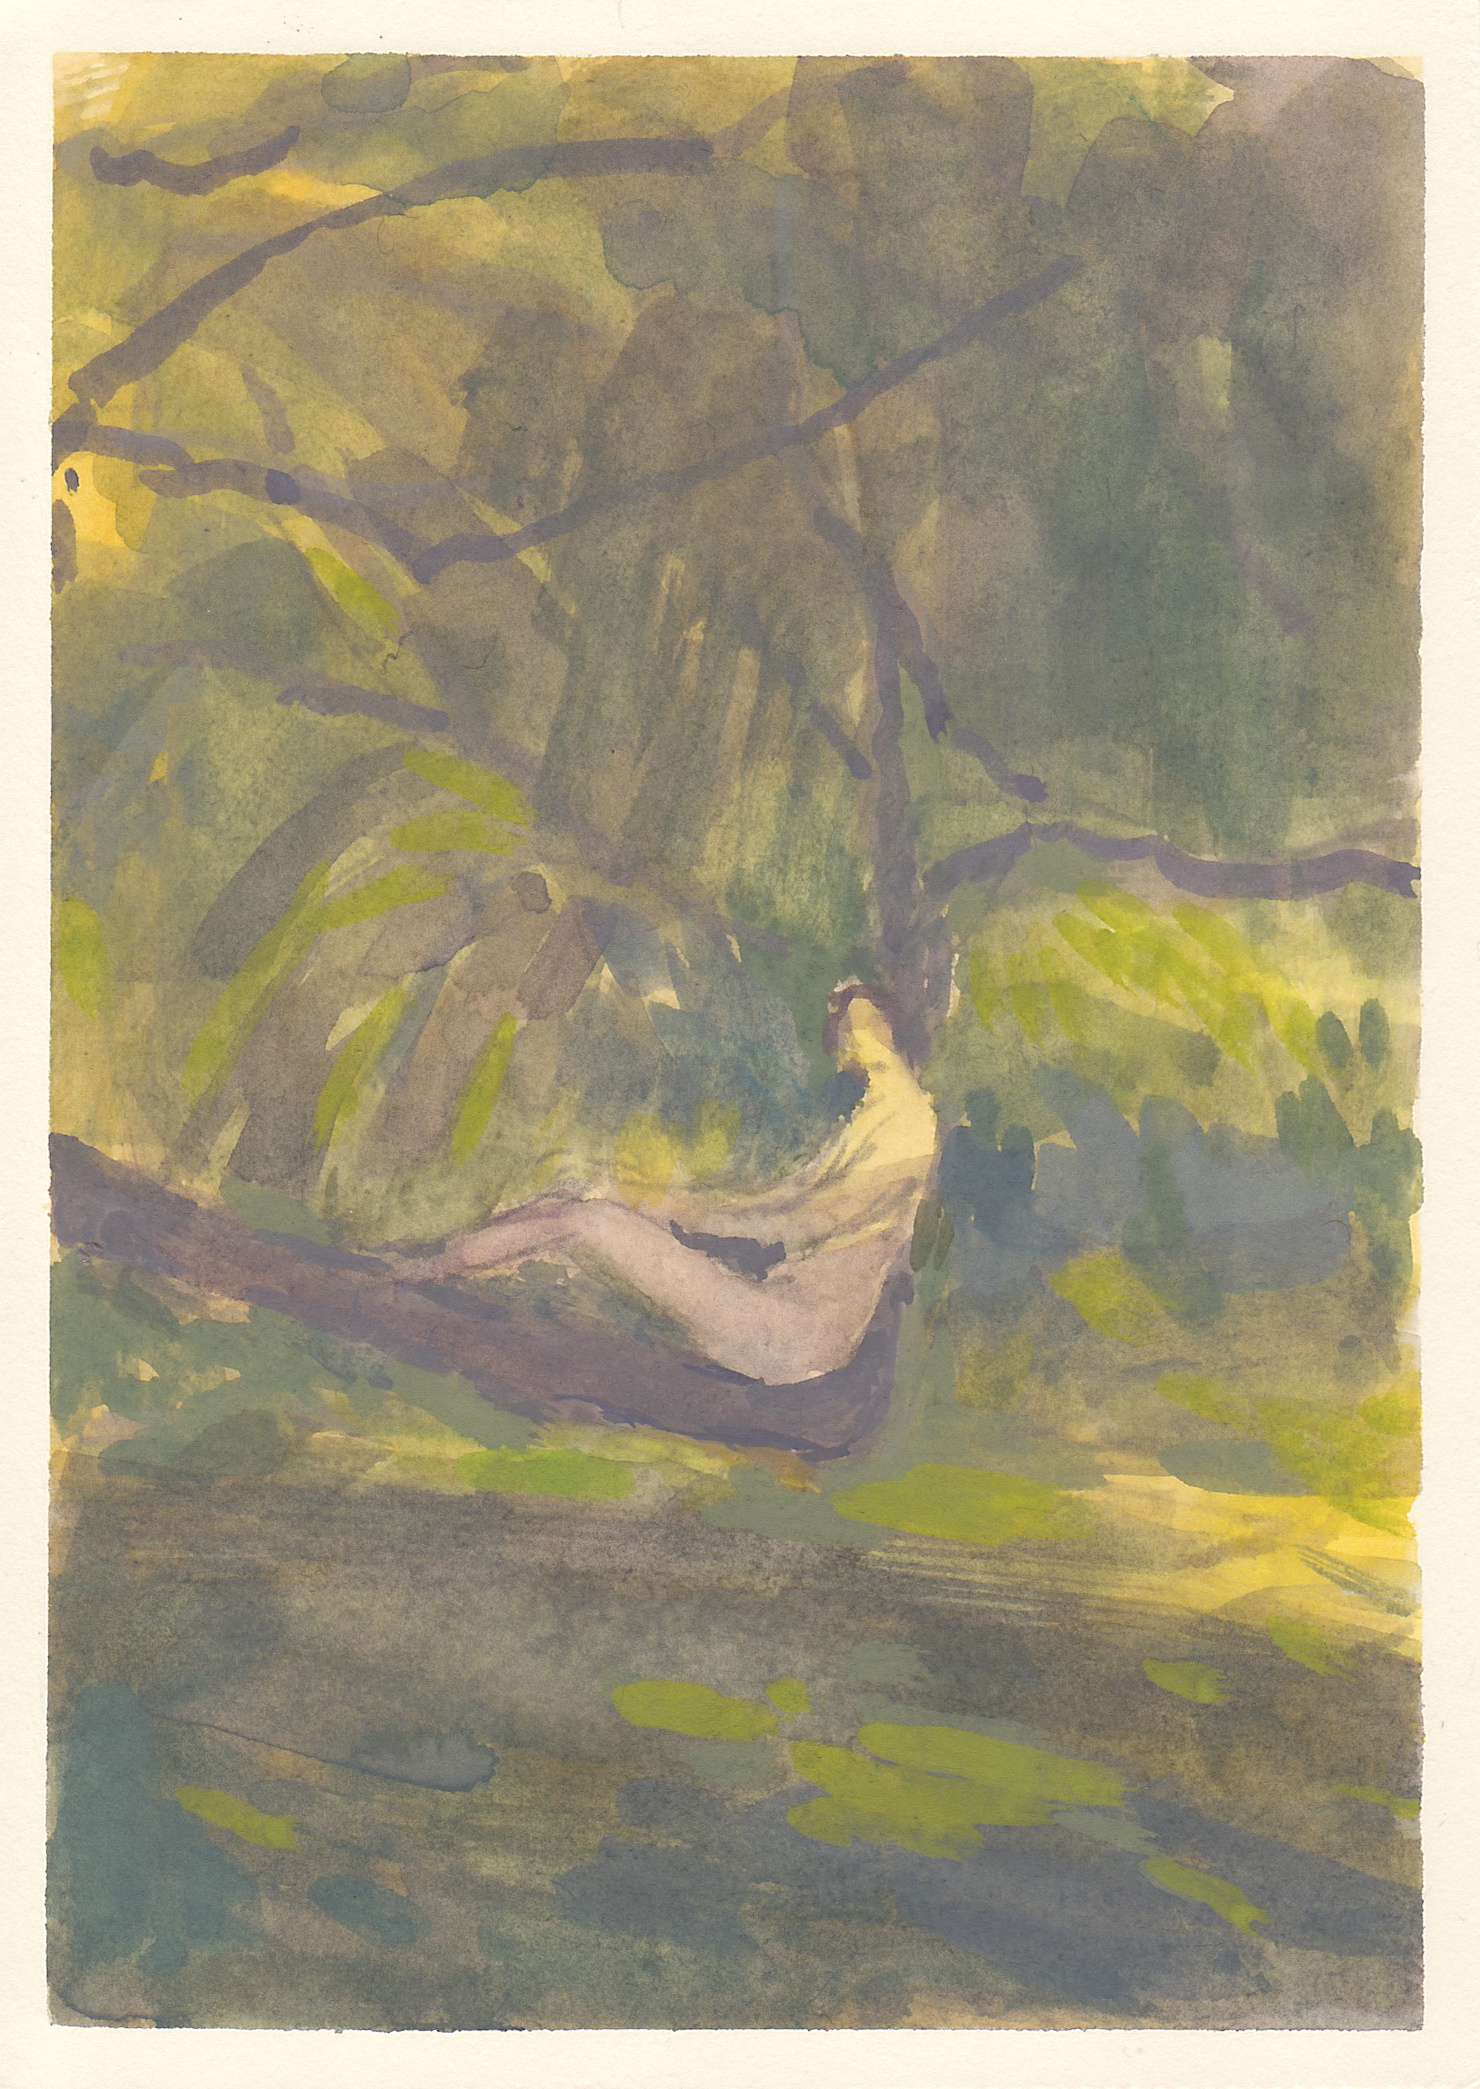    the napping tree     gouache on paper 4.5x6.5" 2018  private collection California 